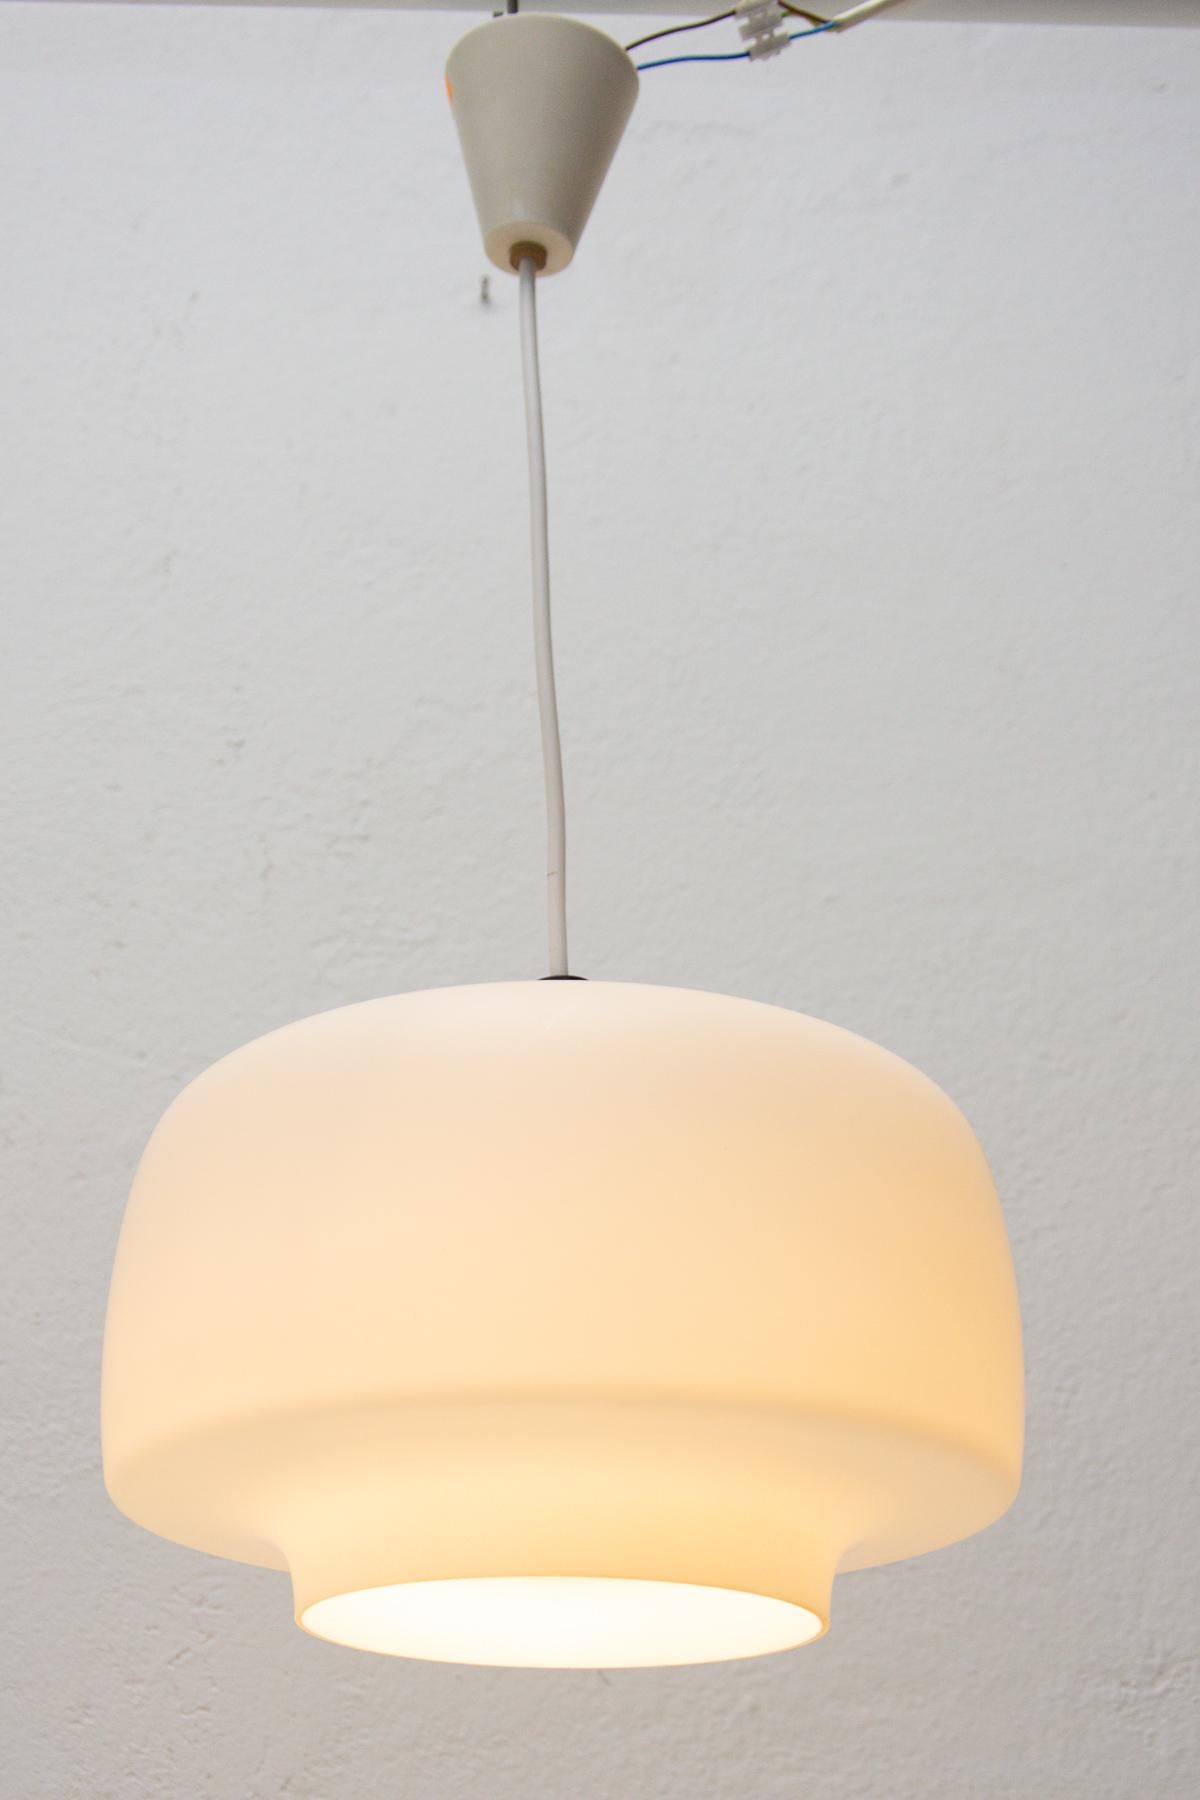 Modernist pendant chandelier made of white opal glass, Czechoslovakia, 1970´s. Suitable for entrance hall, living rooms or office.
In very good vintage condition. Newly wired.

Lampshade height: 17 cm.